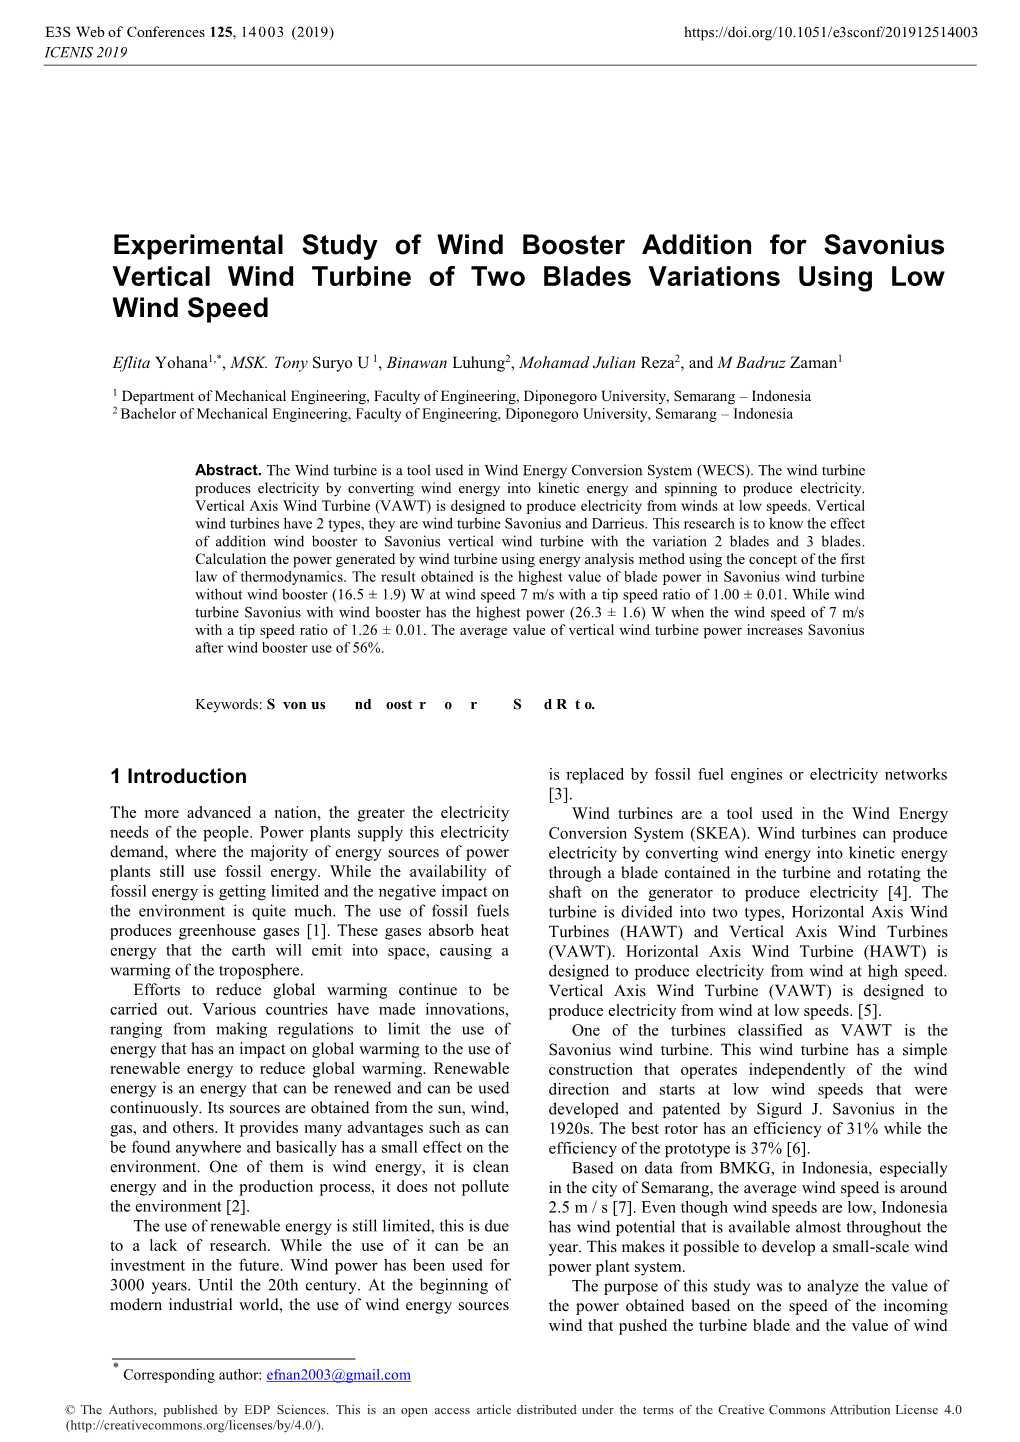 Experimental Study of Wind Booster Addition for Savonius Vertical Wind Turbine of Two Blades Variations Using Low Wind Speed